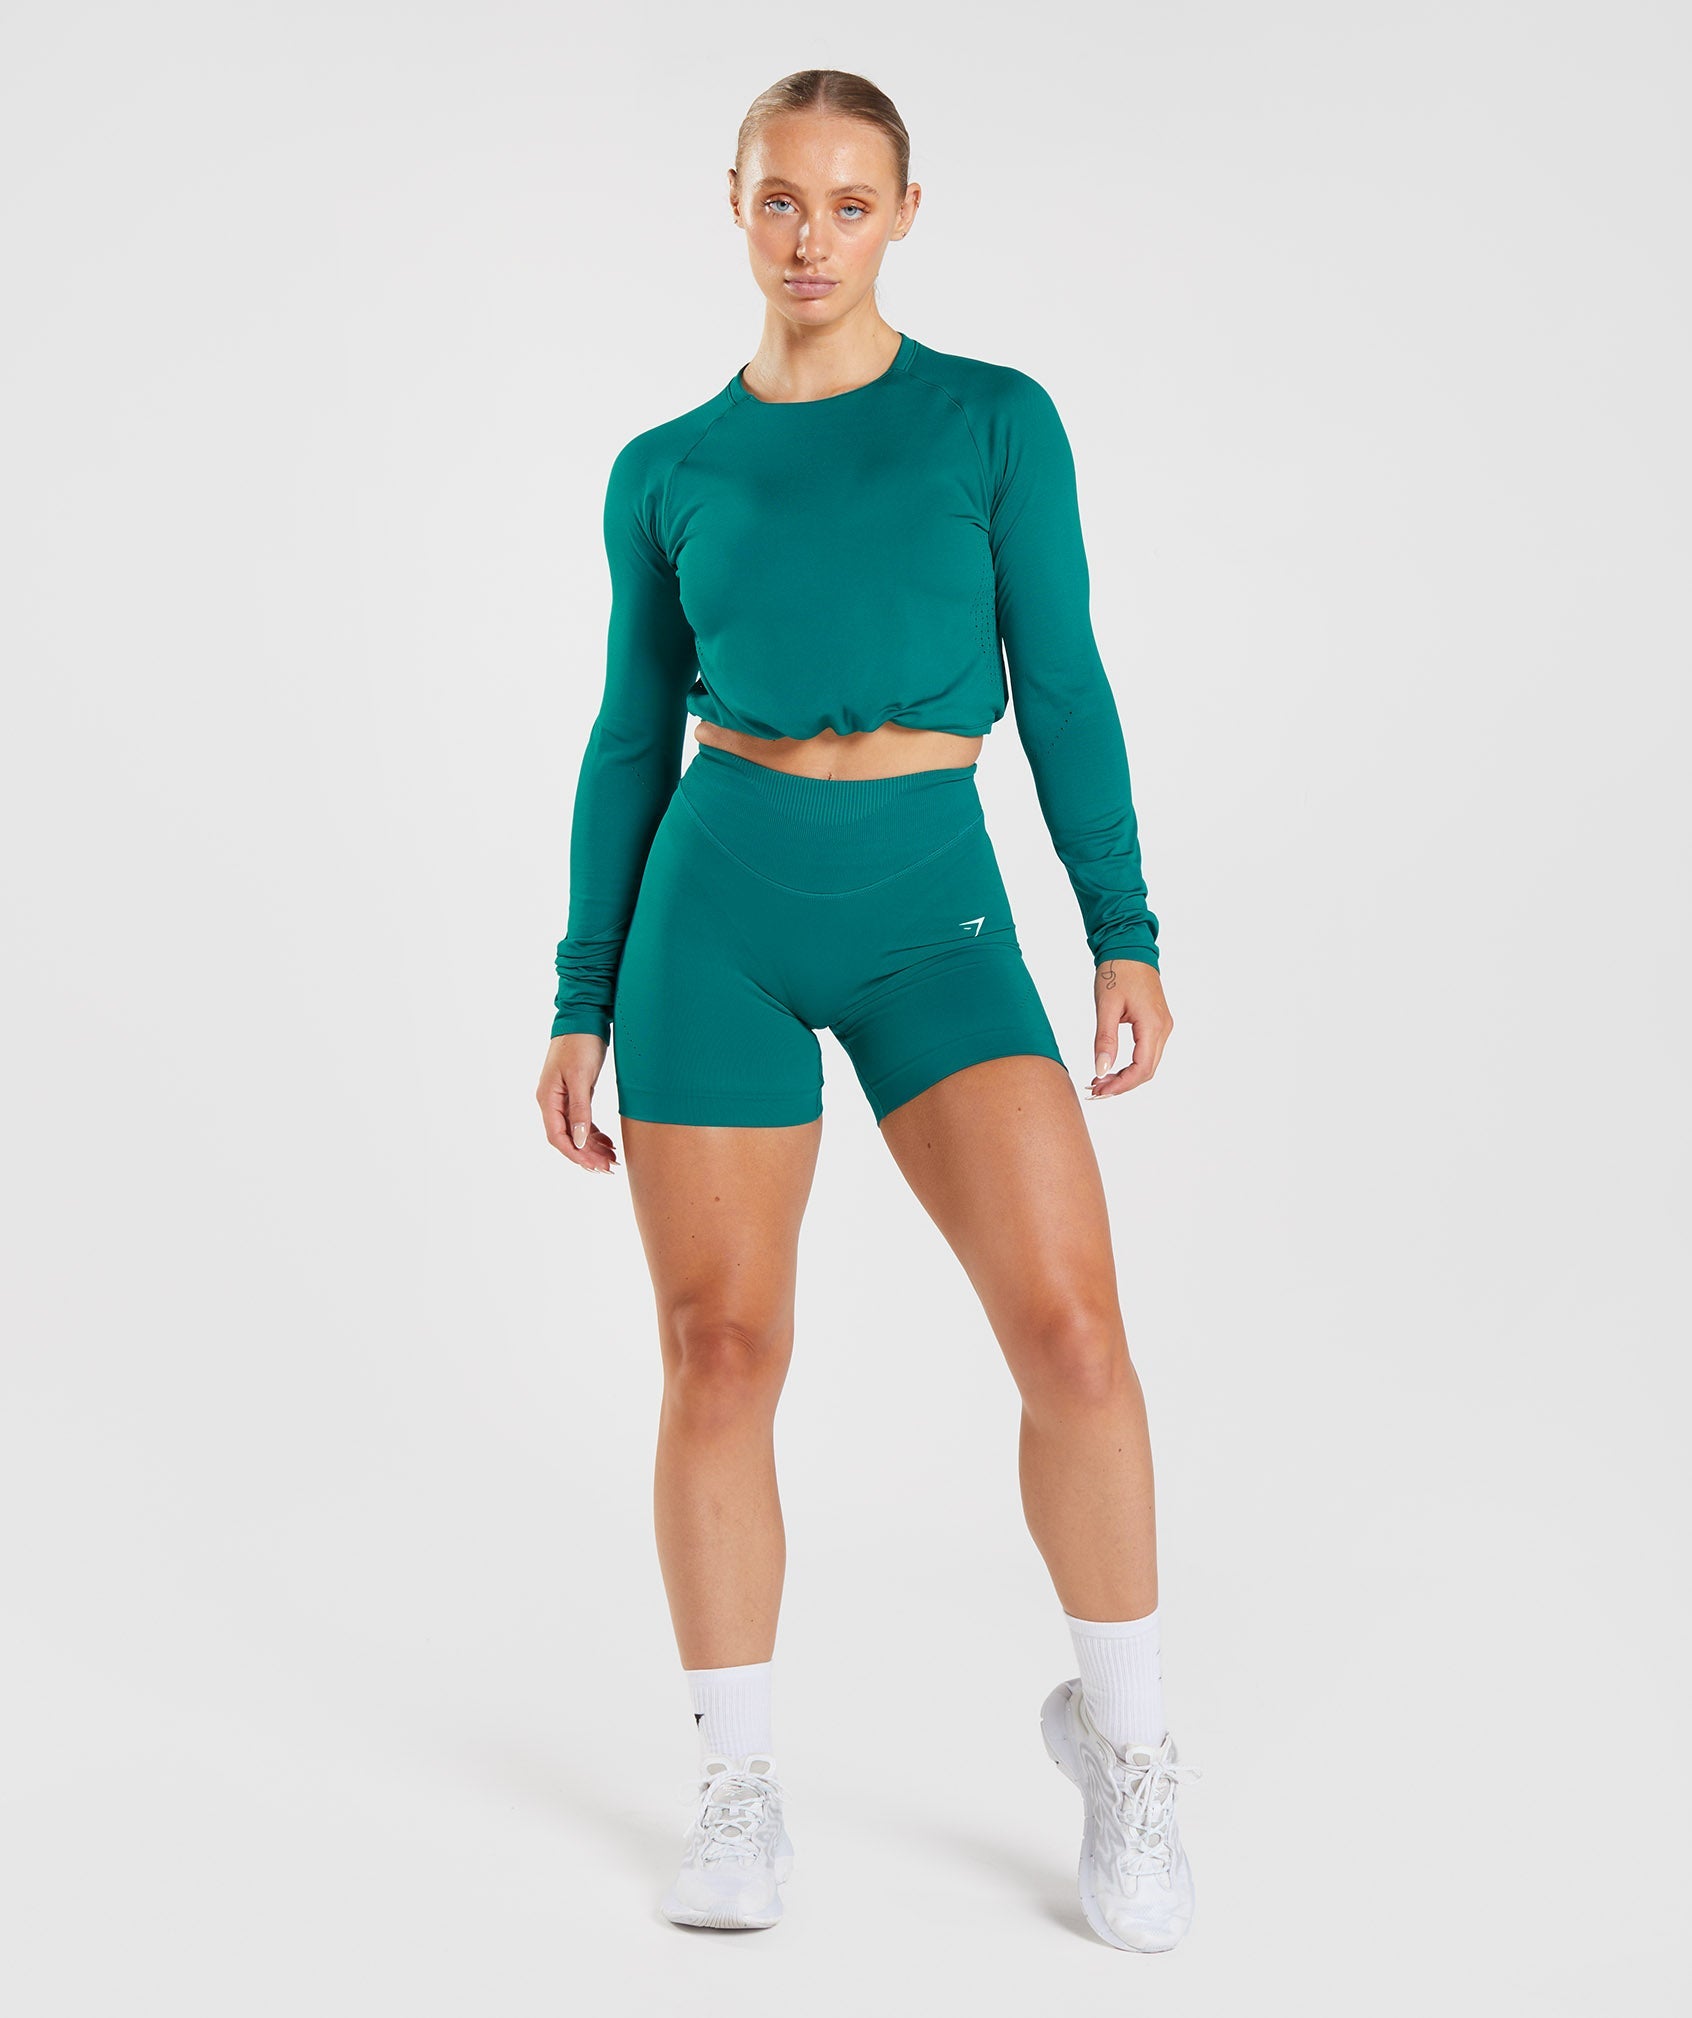 NWT GymShark Geo Ombre Seamless Long Sleeved Crop Top Teal Small